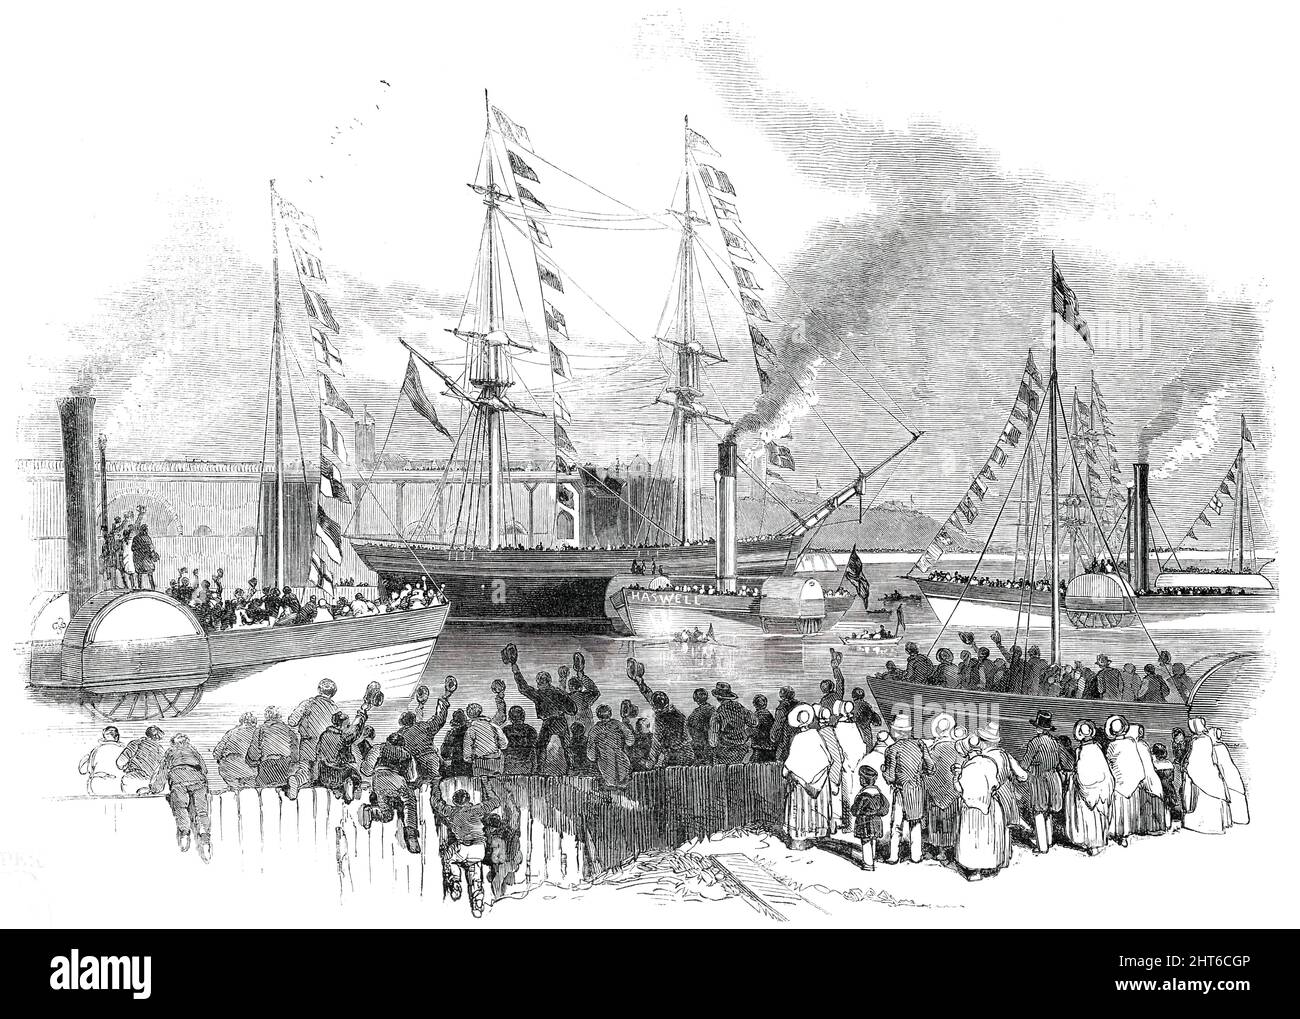 The First Shipment of Coals in the New Sunderland Docks, [Tyne &amp; Wear],1850. 'The entrance to the dock itself is 60 feet wide; the depth of water at the quays will be 20 feet, and in the middle 24 feet. The length of quays in the dock is 5248 feet, which will easily accommodate 40 vessels...The entrance from the river is between the Tidal Gauge and the Low Quay; where a spacious tidal harbour has been formed...The river itself was studded with every variety of craft that human beings could crowd into it; and every vessel of every description, afloat or on the stocks, was radiant above with Stock Photo